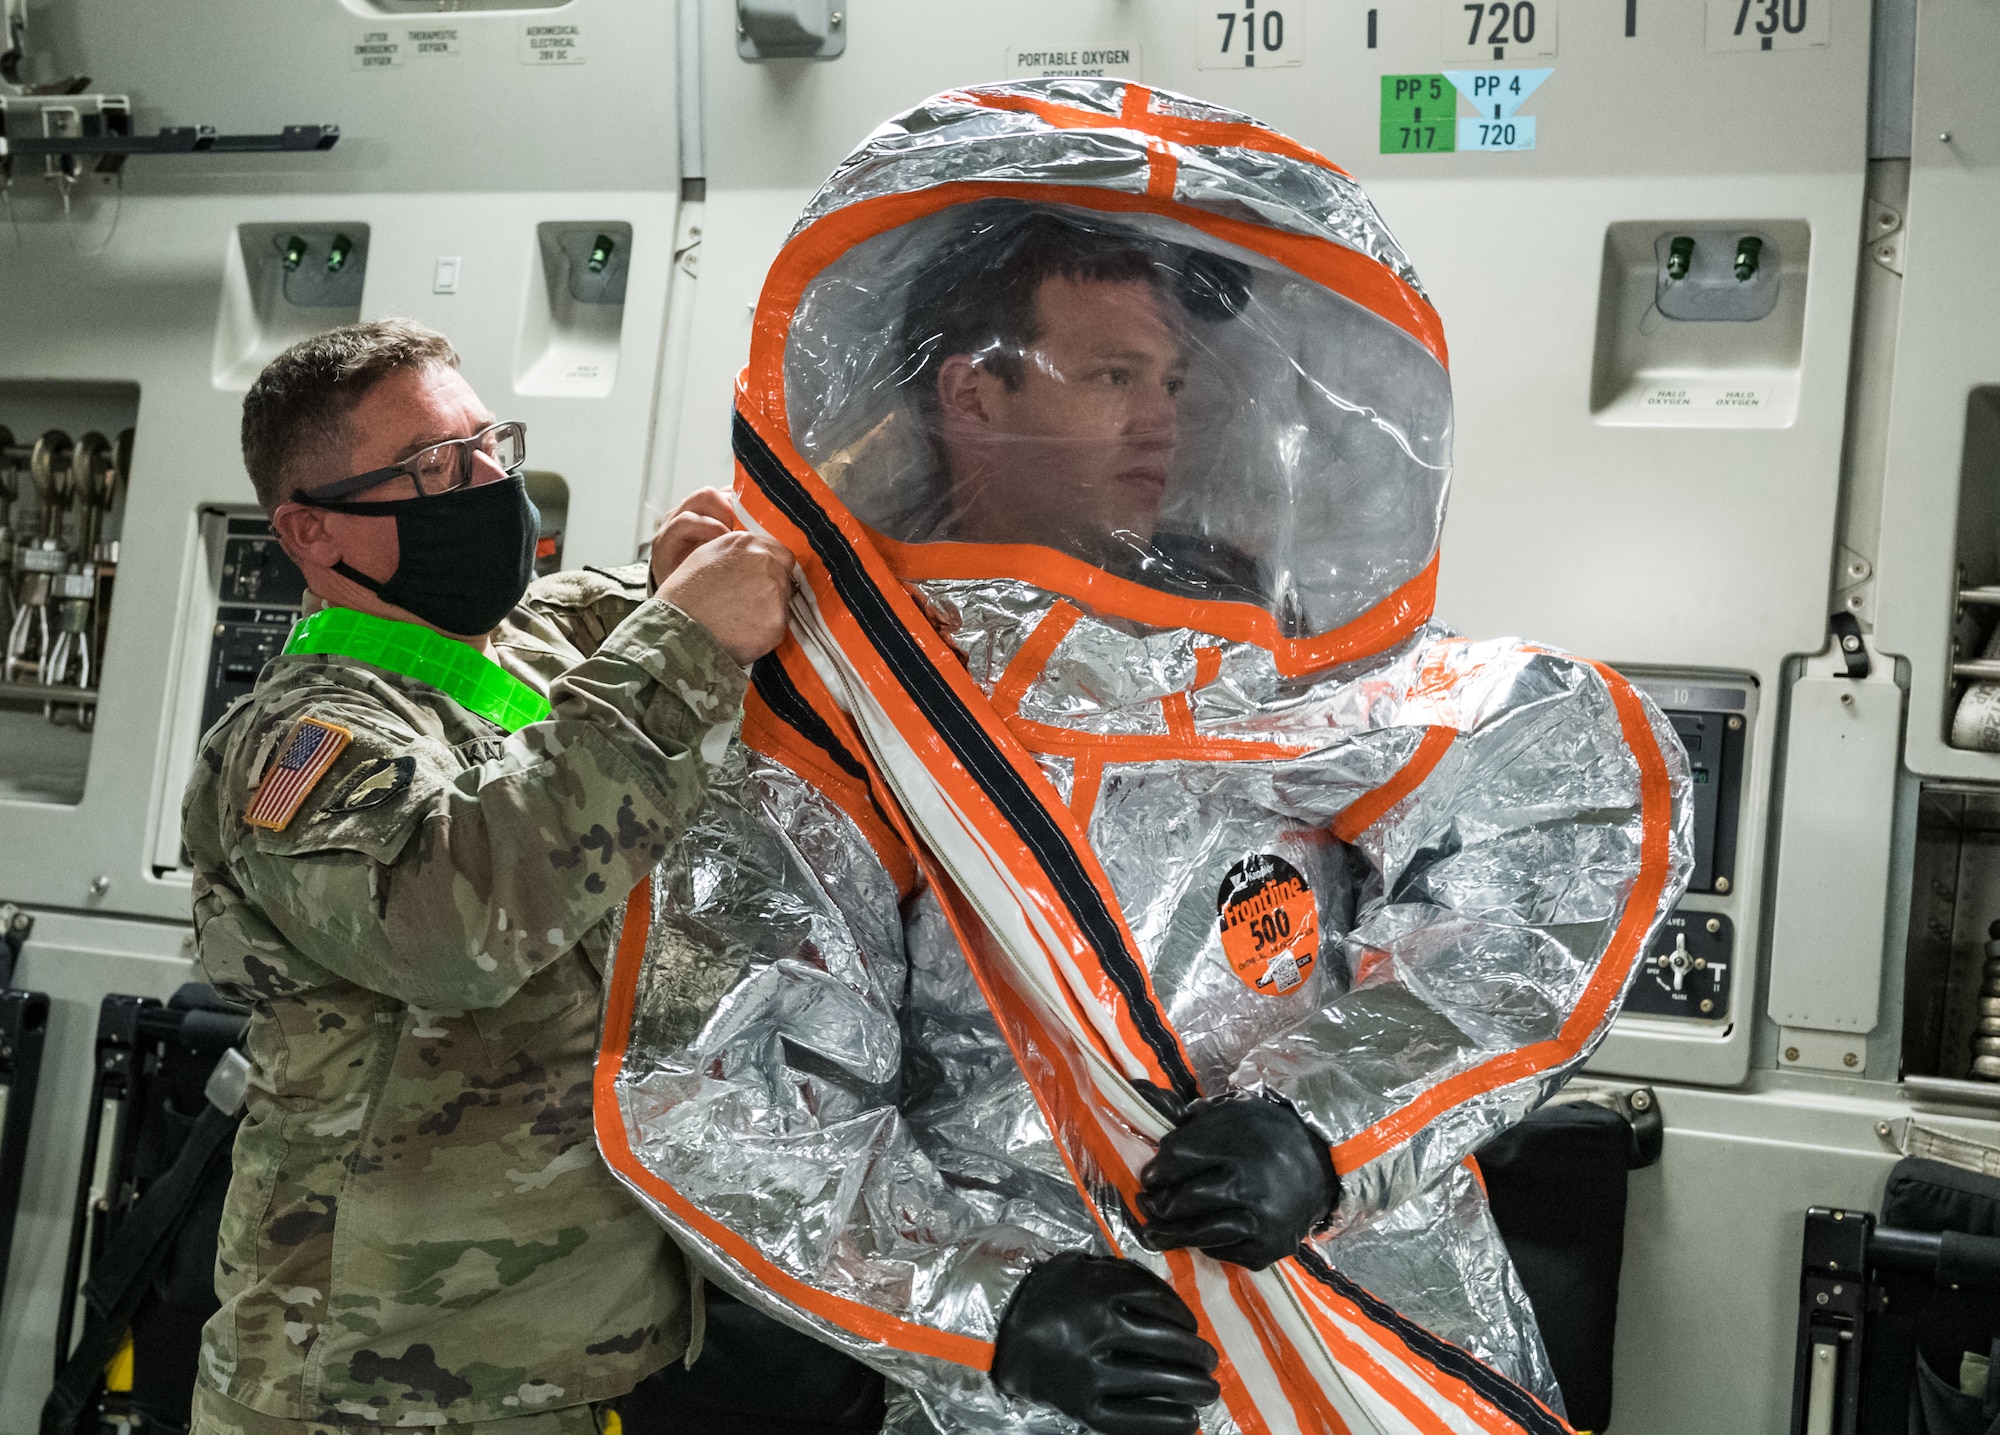 Aboard a C-17 Globemaster III, U.S. Army Chief Warrant Officer 2 Aaron Kazer, 20th Chemical, Biological, Radiological, Nuclear and Explosives Command mobility officer, helps Maj. Mark Quint, 20th CBRNE nuclear disablement team deputy chief, don personal protective equipment for display purposes Sept. 19, 2020, at Dover Air Force Base, Delaware. The 20th CBRNE Command recently conducted a deployment readiness exercise, which consisted of several inspections, aerial troop movements and convoys. The 20th CBRNE Command ensures the effective countering of CBRNE hazards at home and abroad. Dover AFB serves as the primary port of embark for the 20th CBRNE Command during both exercises and operations and regularly supports similar joint missions. (U.S. Air Force photo by Roland Balik)